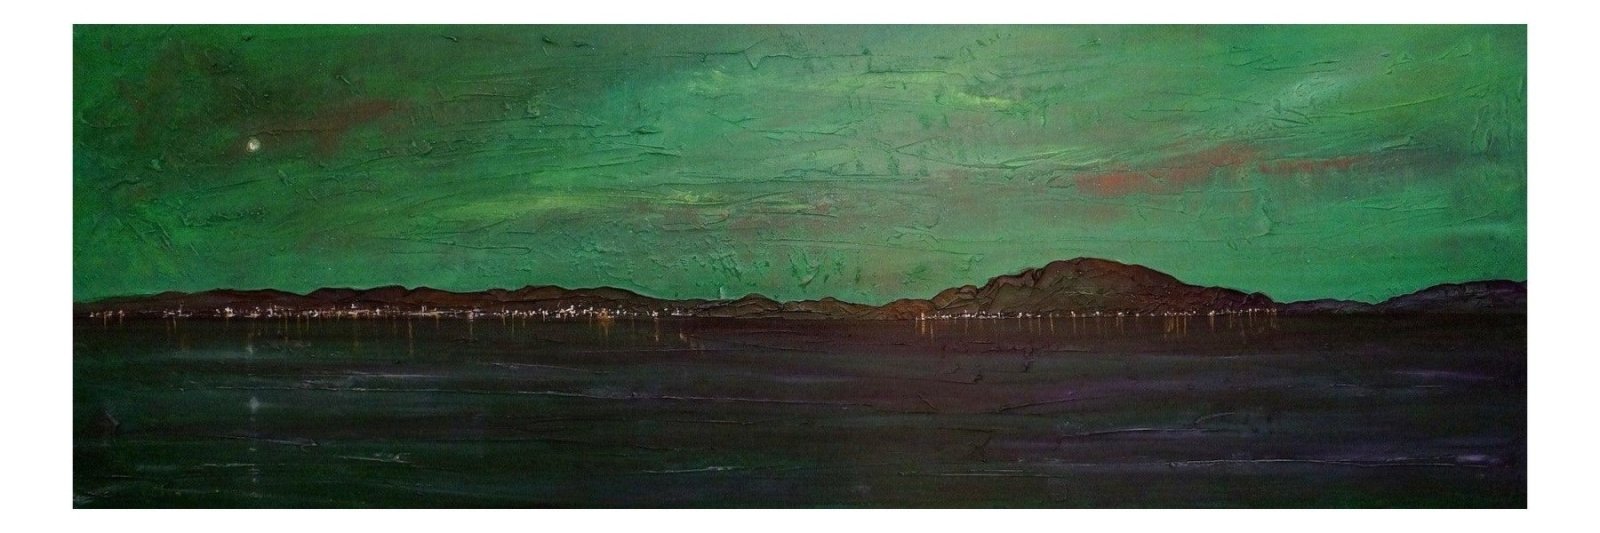 An Ethereal Clyde Night-Panoramic Prints-River Clyde Art Gallery-Paintings, Prints, Homeware, Art Gifts From Scotland By Scottish Artist Kevin Hunter